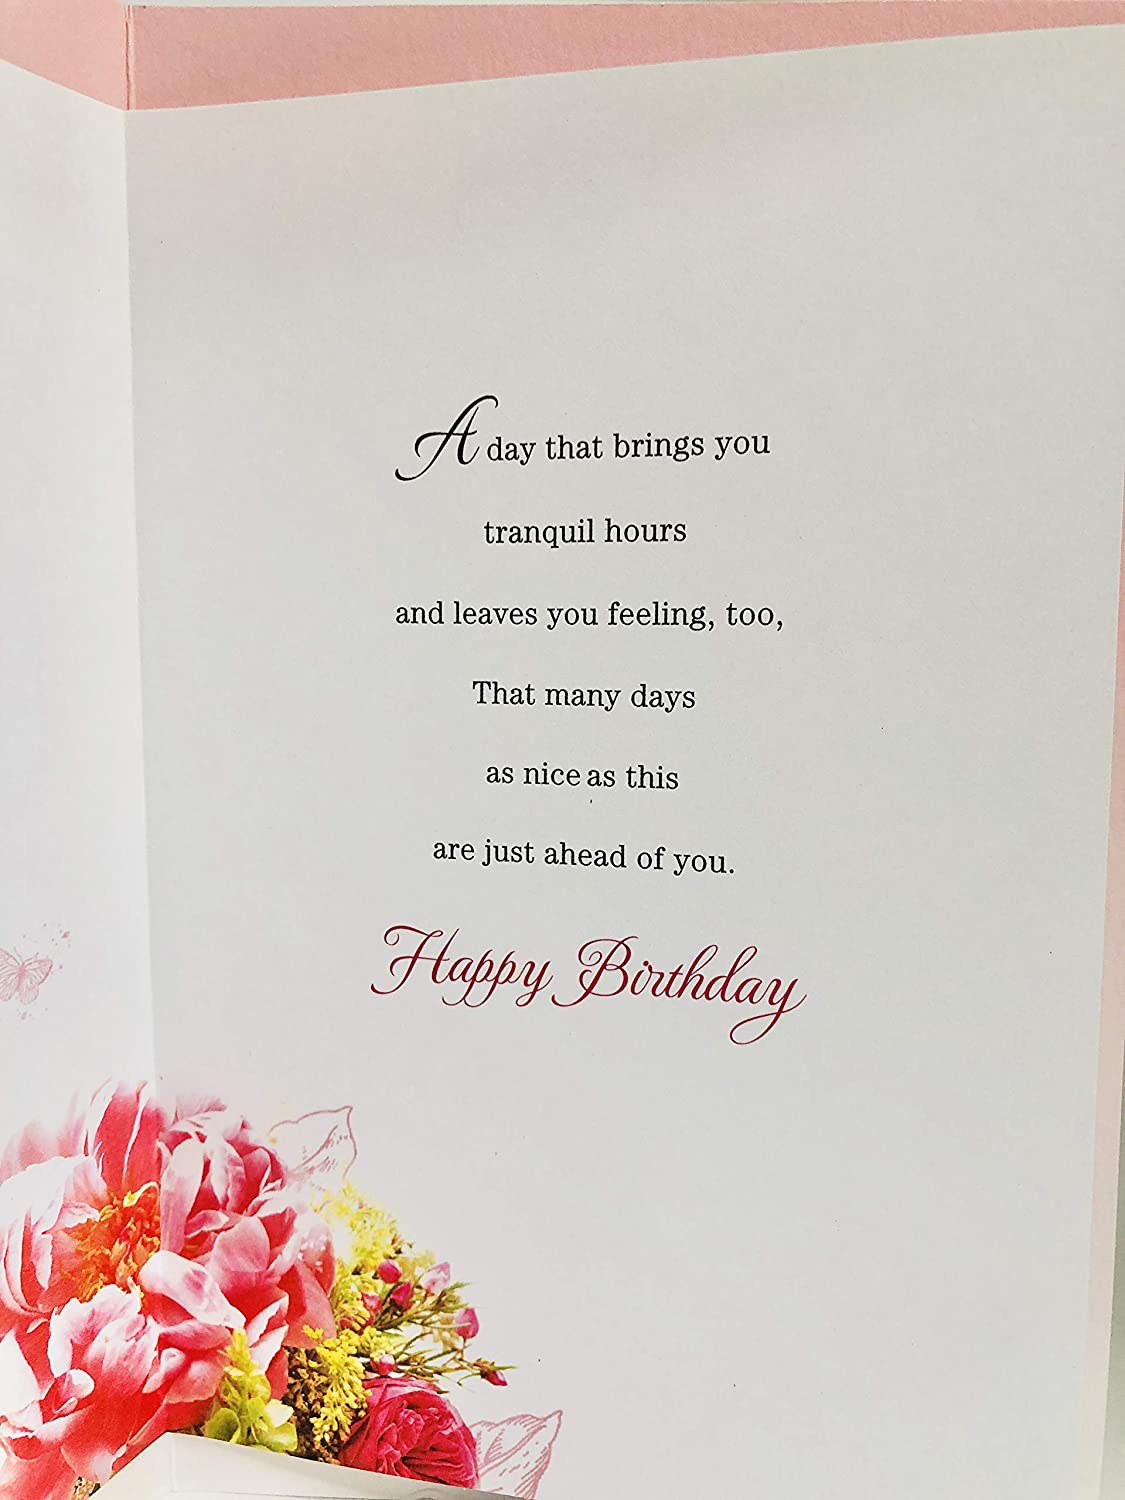 Just For You Auntie Floral Design Birthday Card 